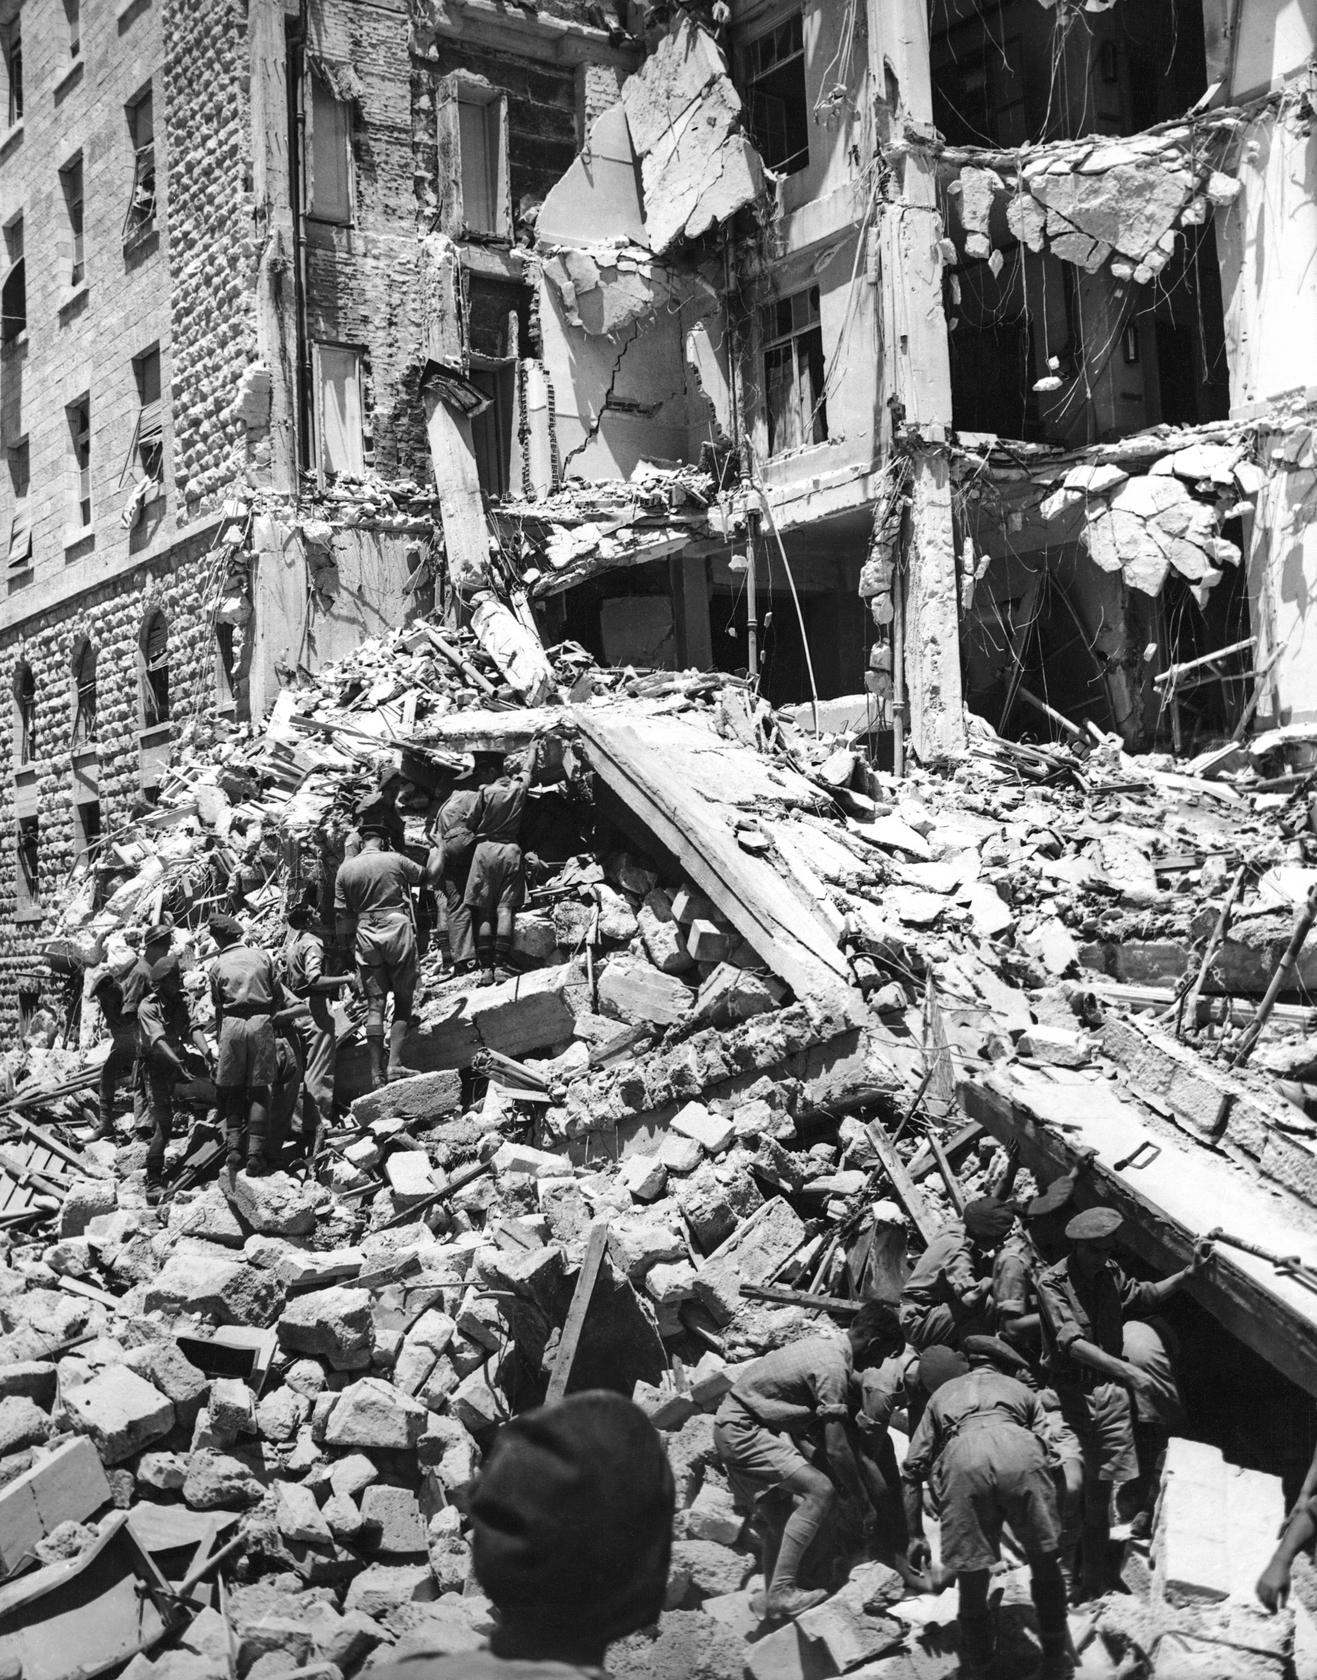 Jerusalem's King David Hotel, the British Army headquarters in Palestine, was bombed by Irgun in July 1946, killing 92 people. Photo: Corbis